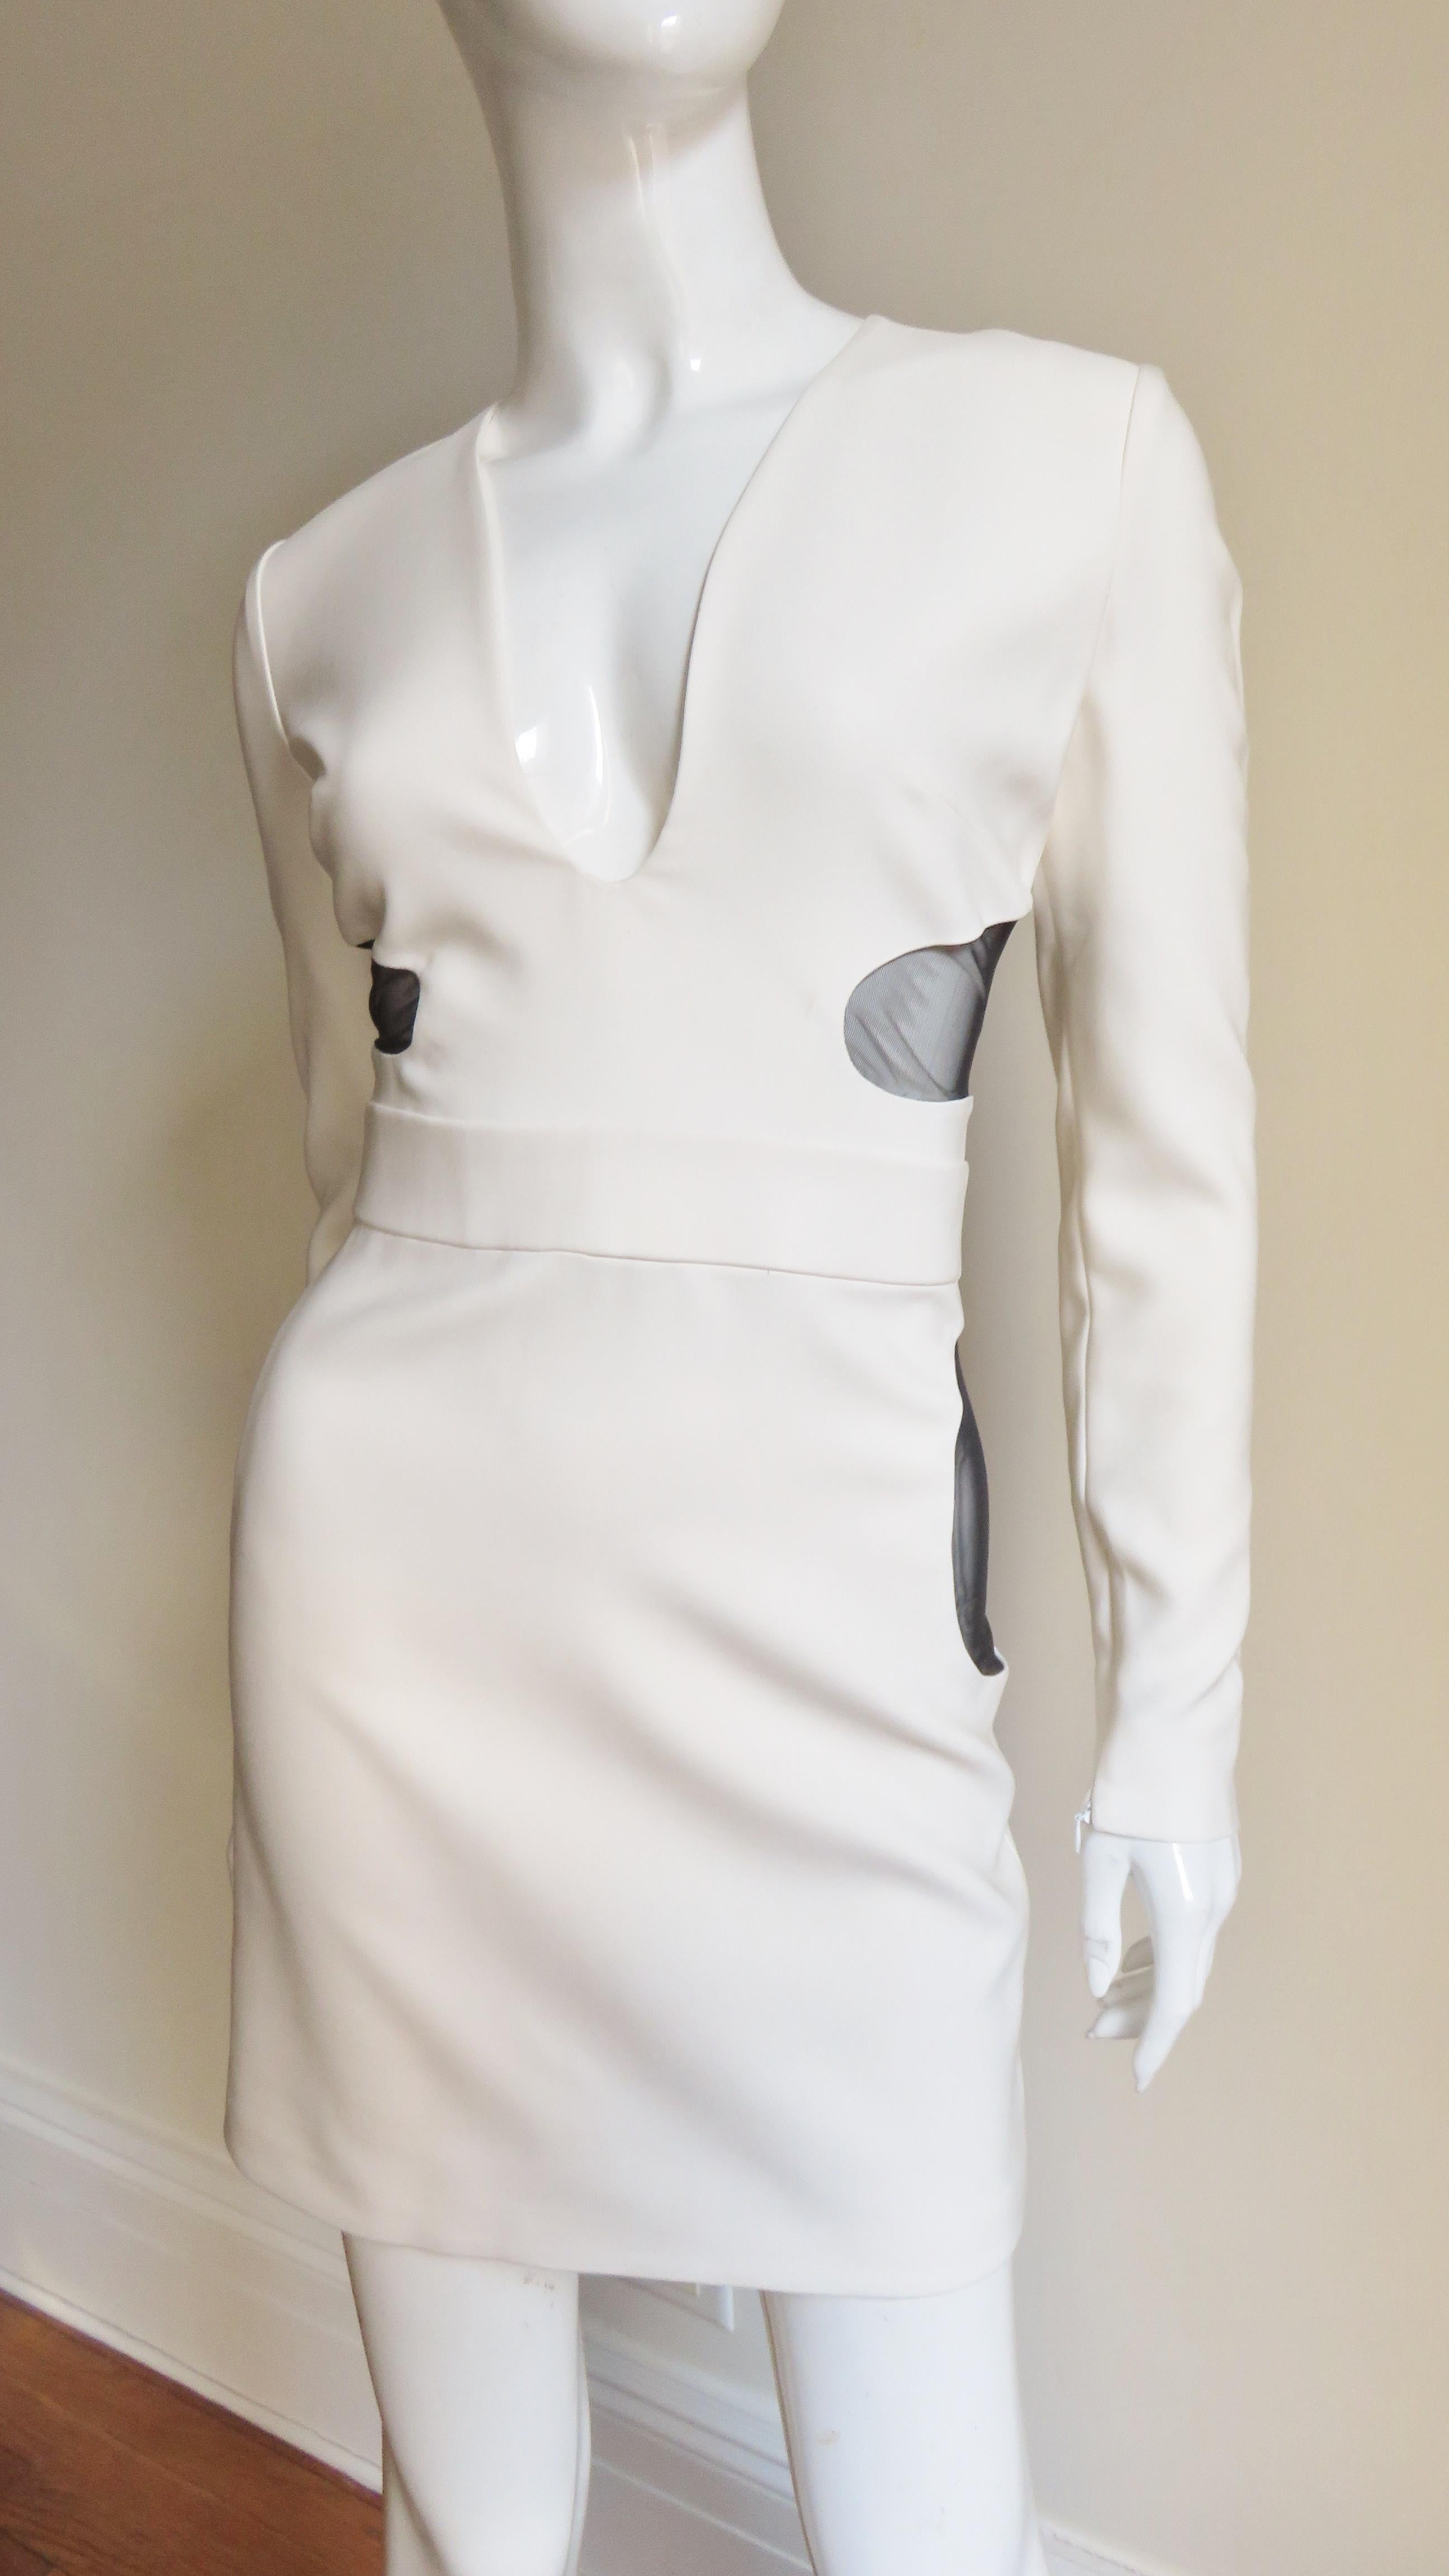 Women's Tom Ford New Plunge Dress with Cut outs For Sale